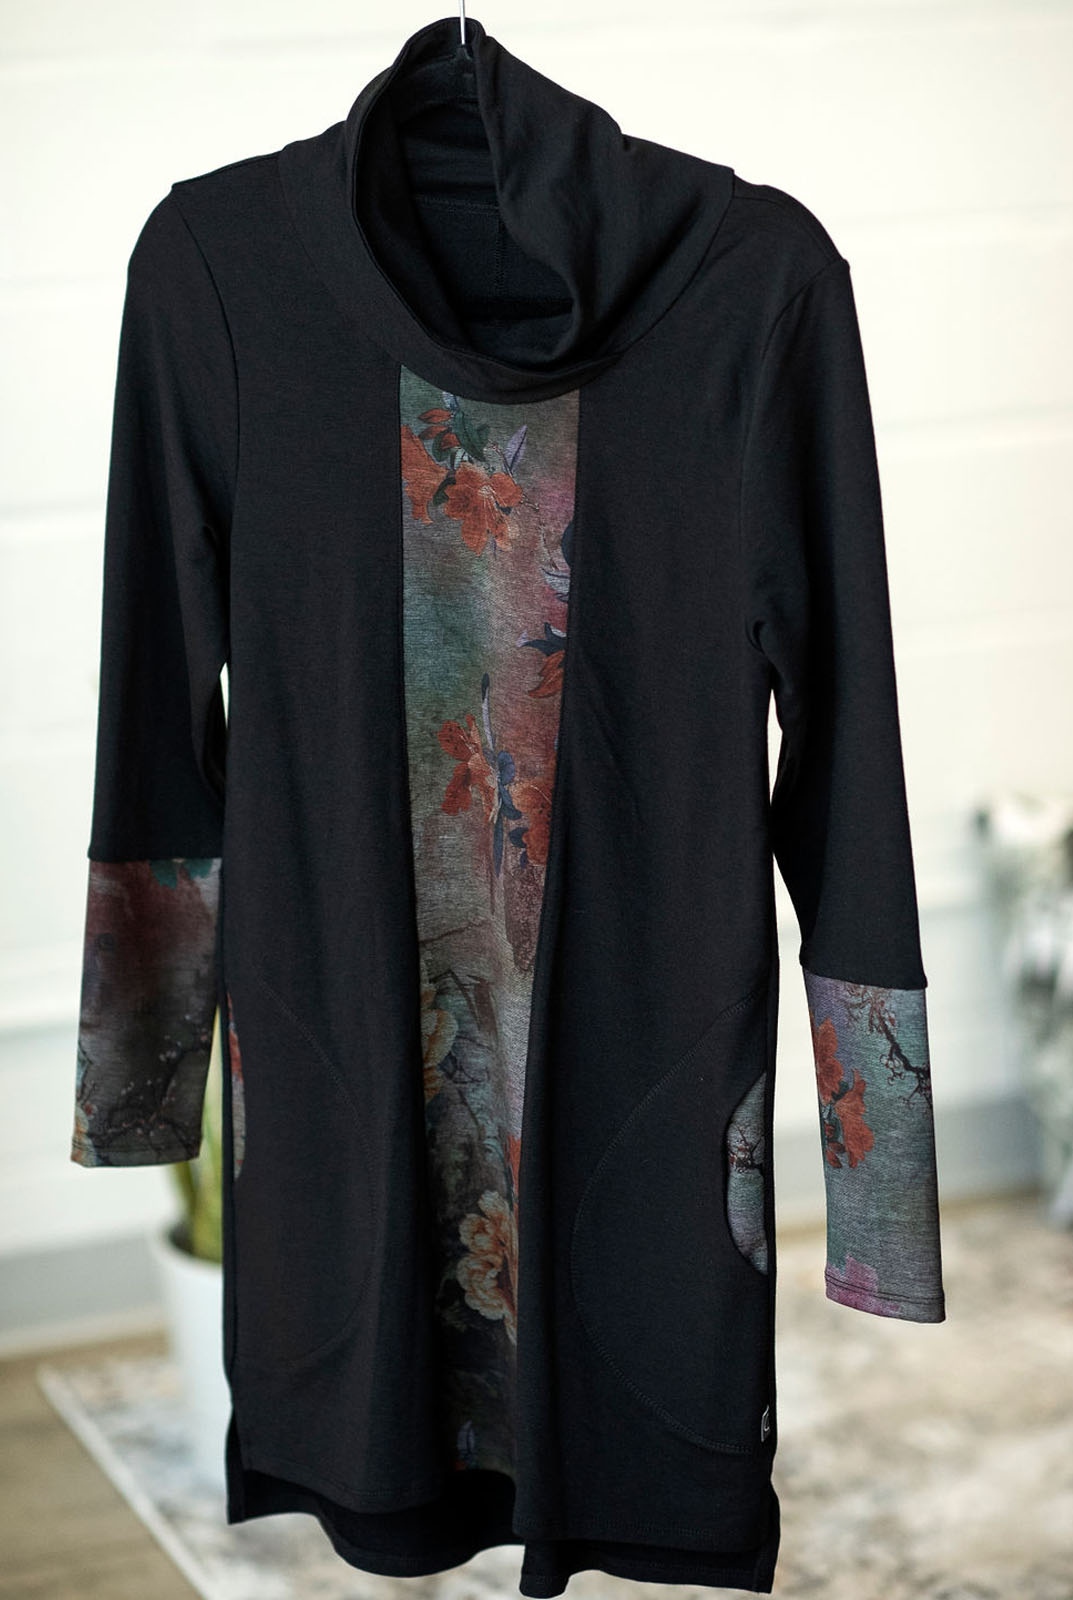 Honora Dress by Marie C, Black, cowl neck, long sleeves, contrasting floral fabric on front panel and sleeves, hi-low hemline, rounded inseam pockets, sizes XS to XL, made in Quebec